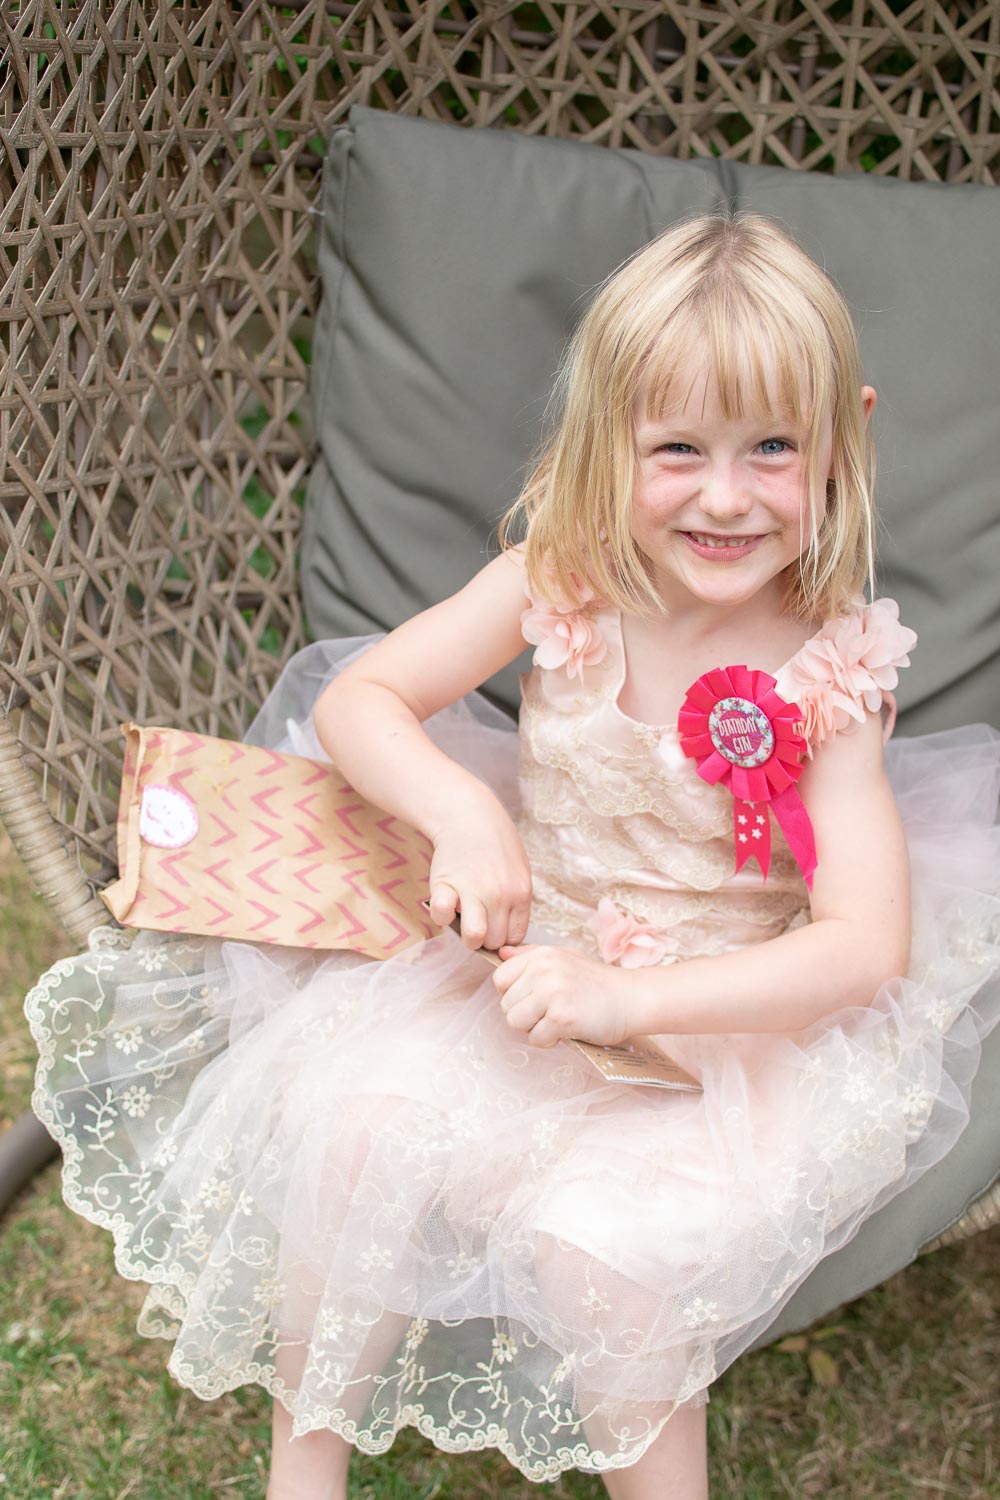 Daisy and her zero waste party bag from cotton twist